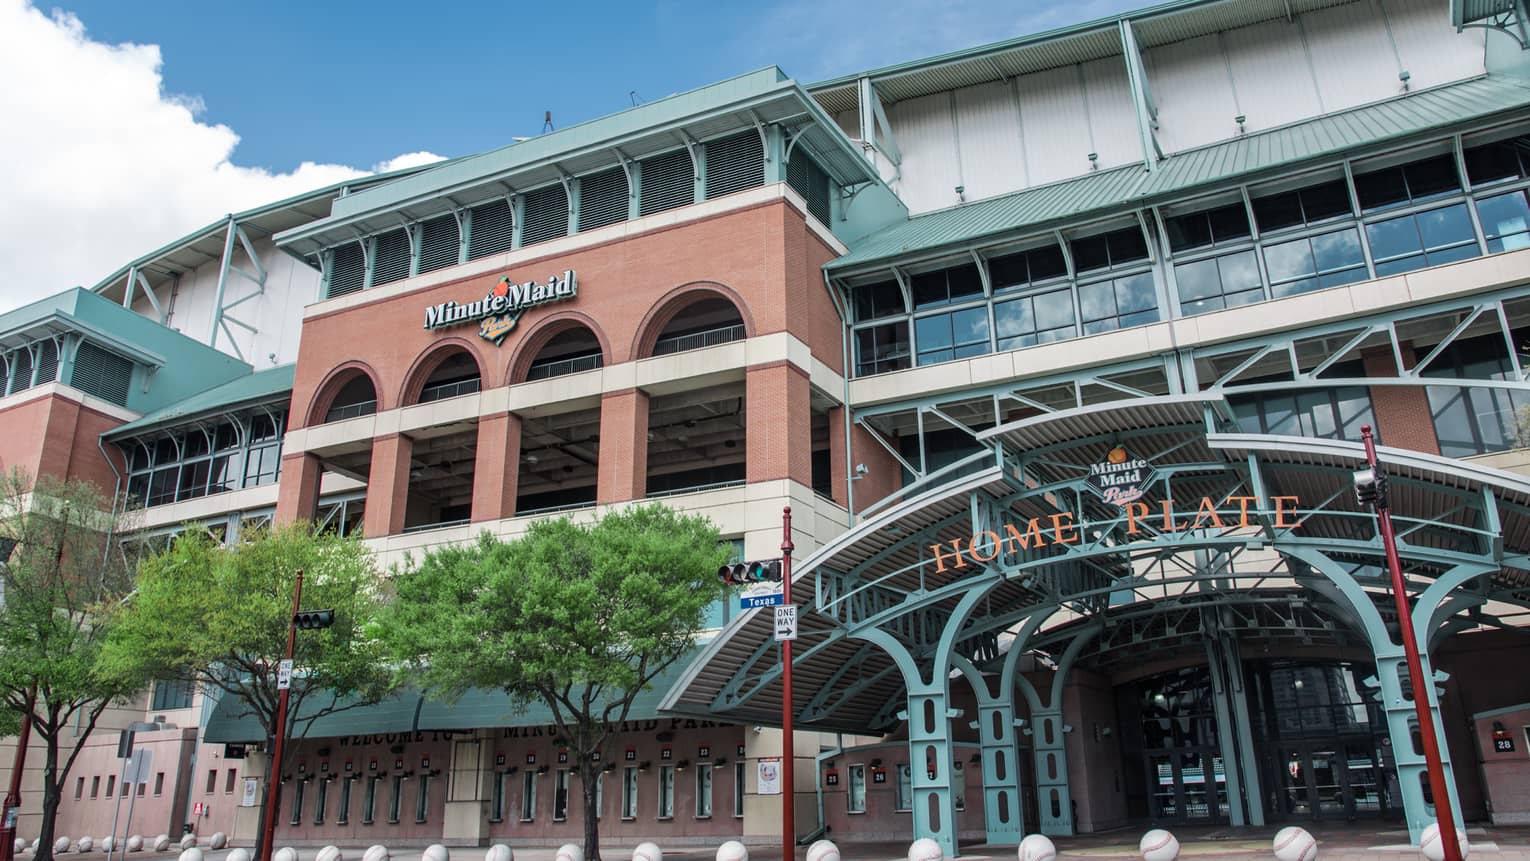 The exterior of Minute Maid park, home of the Houston Astros